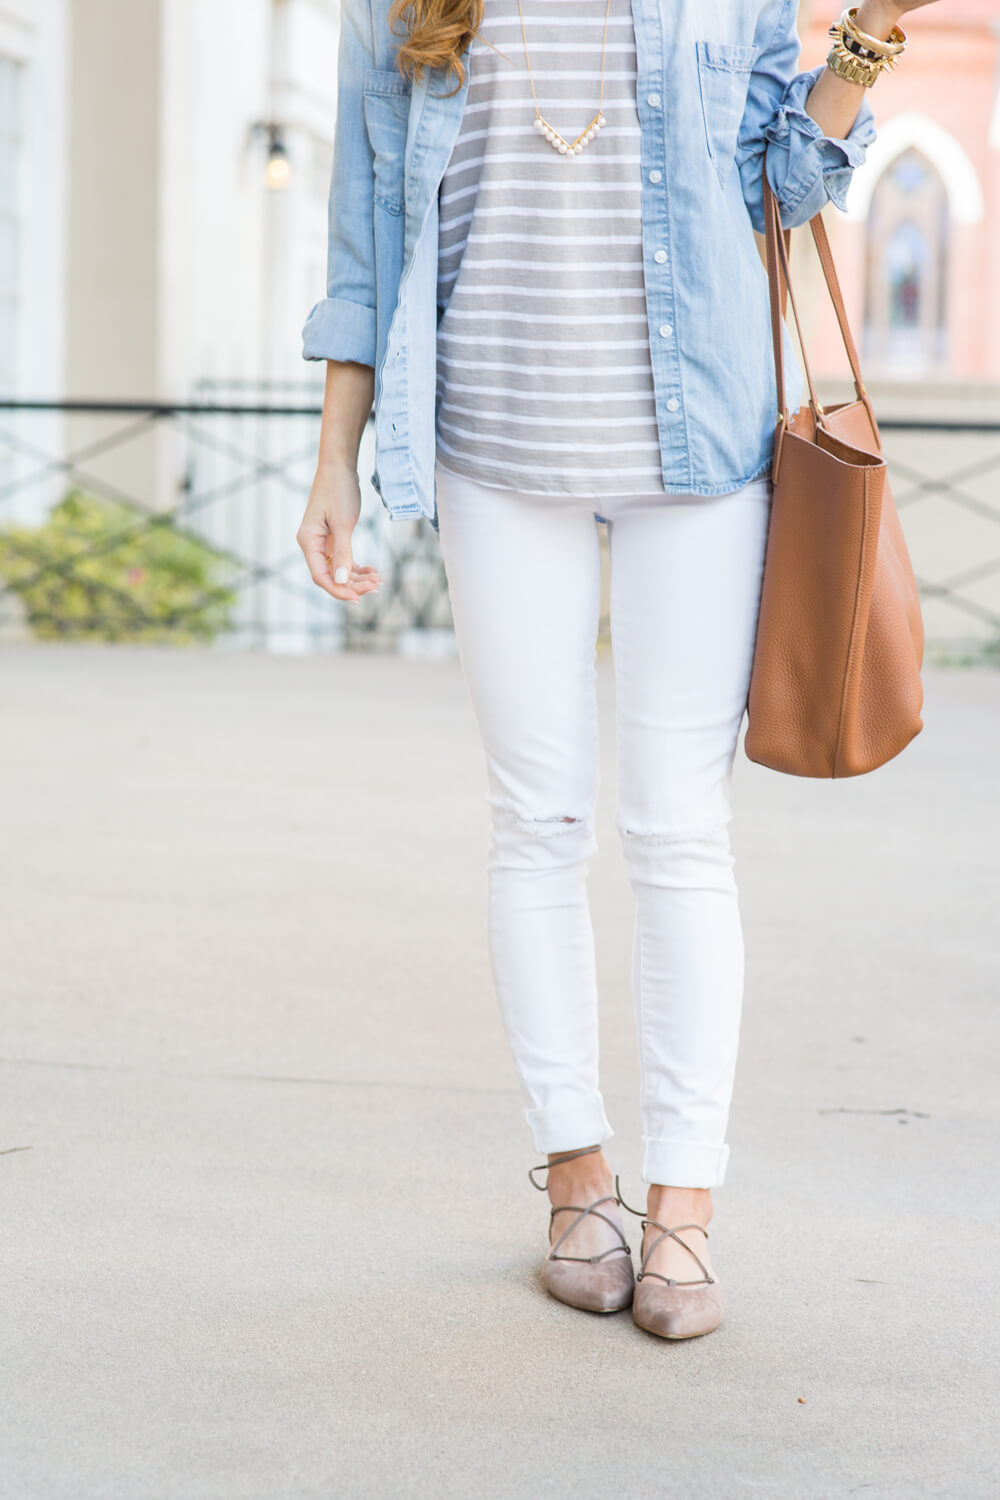 brighton the day wearing white jeans with stuart weitzman lace up flats in taupe suede